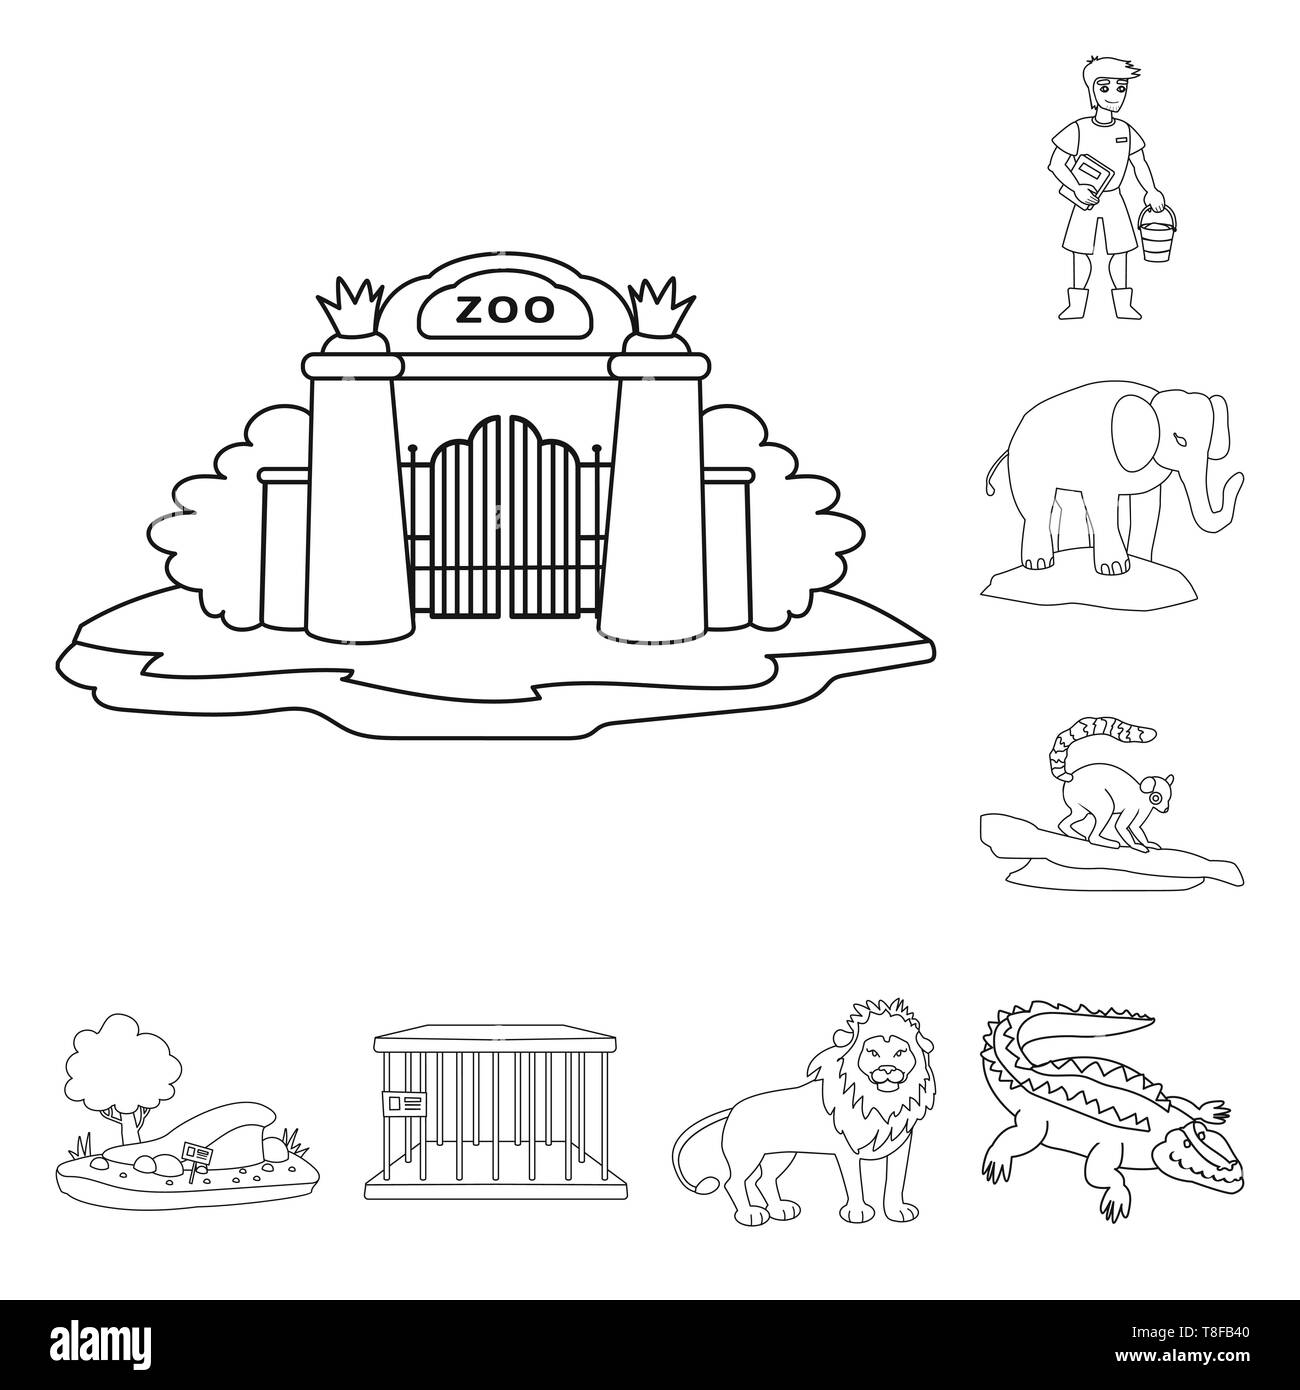 gate,zookeeper,elephant,lemur,trees,cell,lion,crocodile,arch,man,cute,monkey,sand,empty,alligator,exit,keeper,Africa,tropical,mound,jail,jungle,open,bucket,south,grass,metal,mane,entertainment,forest,zoo,park,safari,animal,nature,fun,fauna,flora,set,vector,icon,illustration,isolated,collection,design,element,graphic,sign,outline,line Vector Vectors , Stock Vector